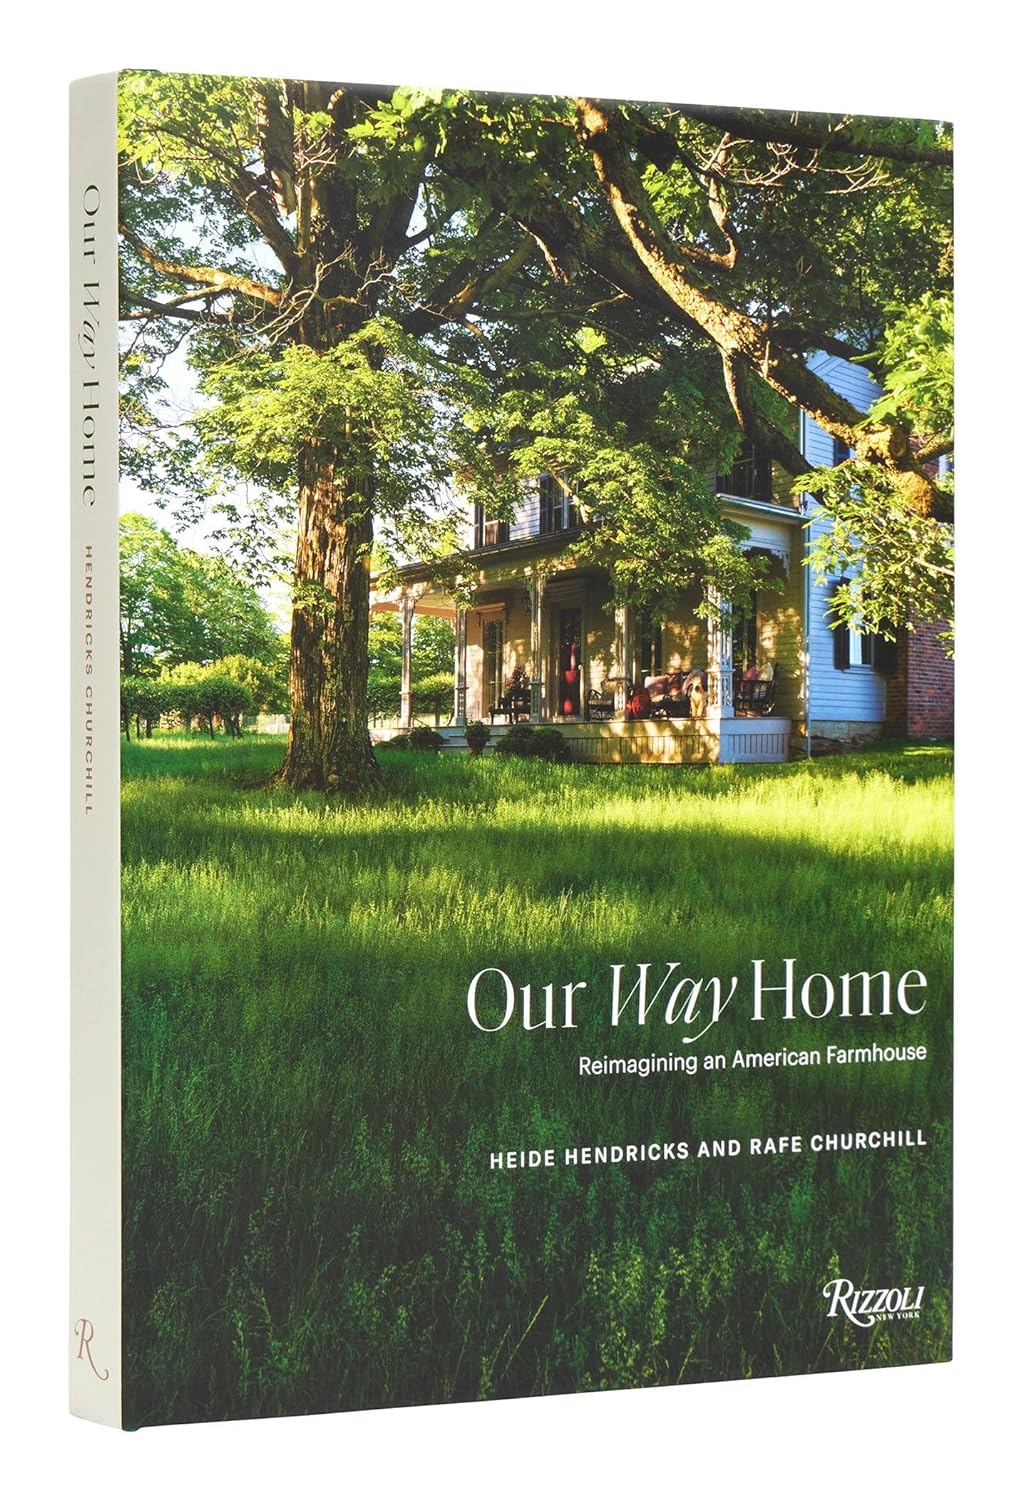 BOOK "OUR WAY HOME"